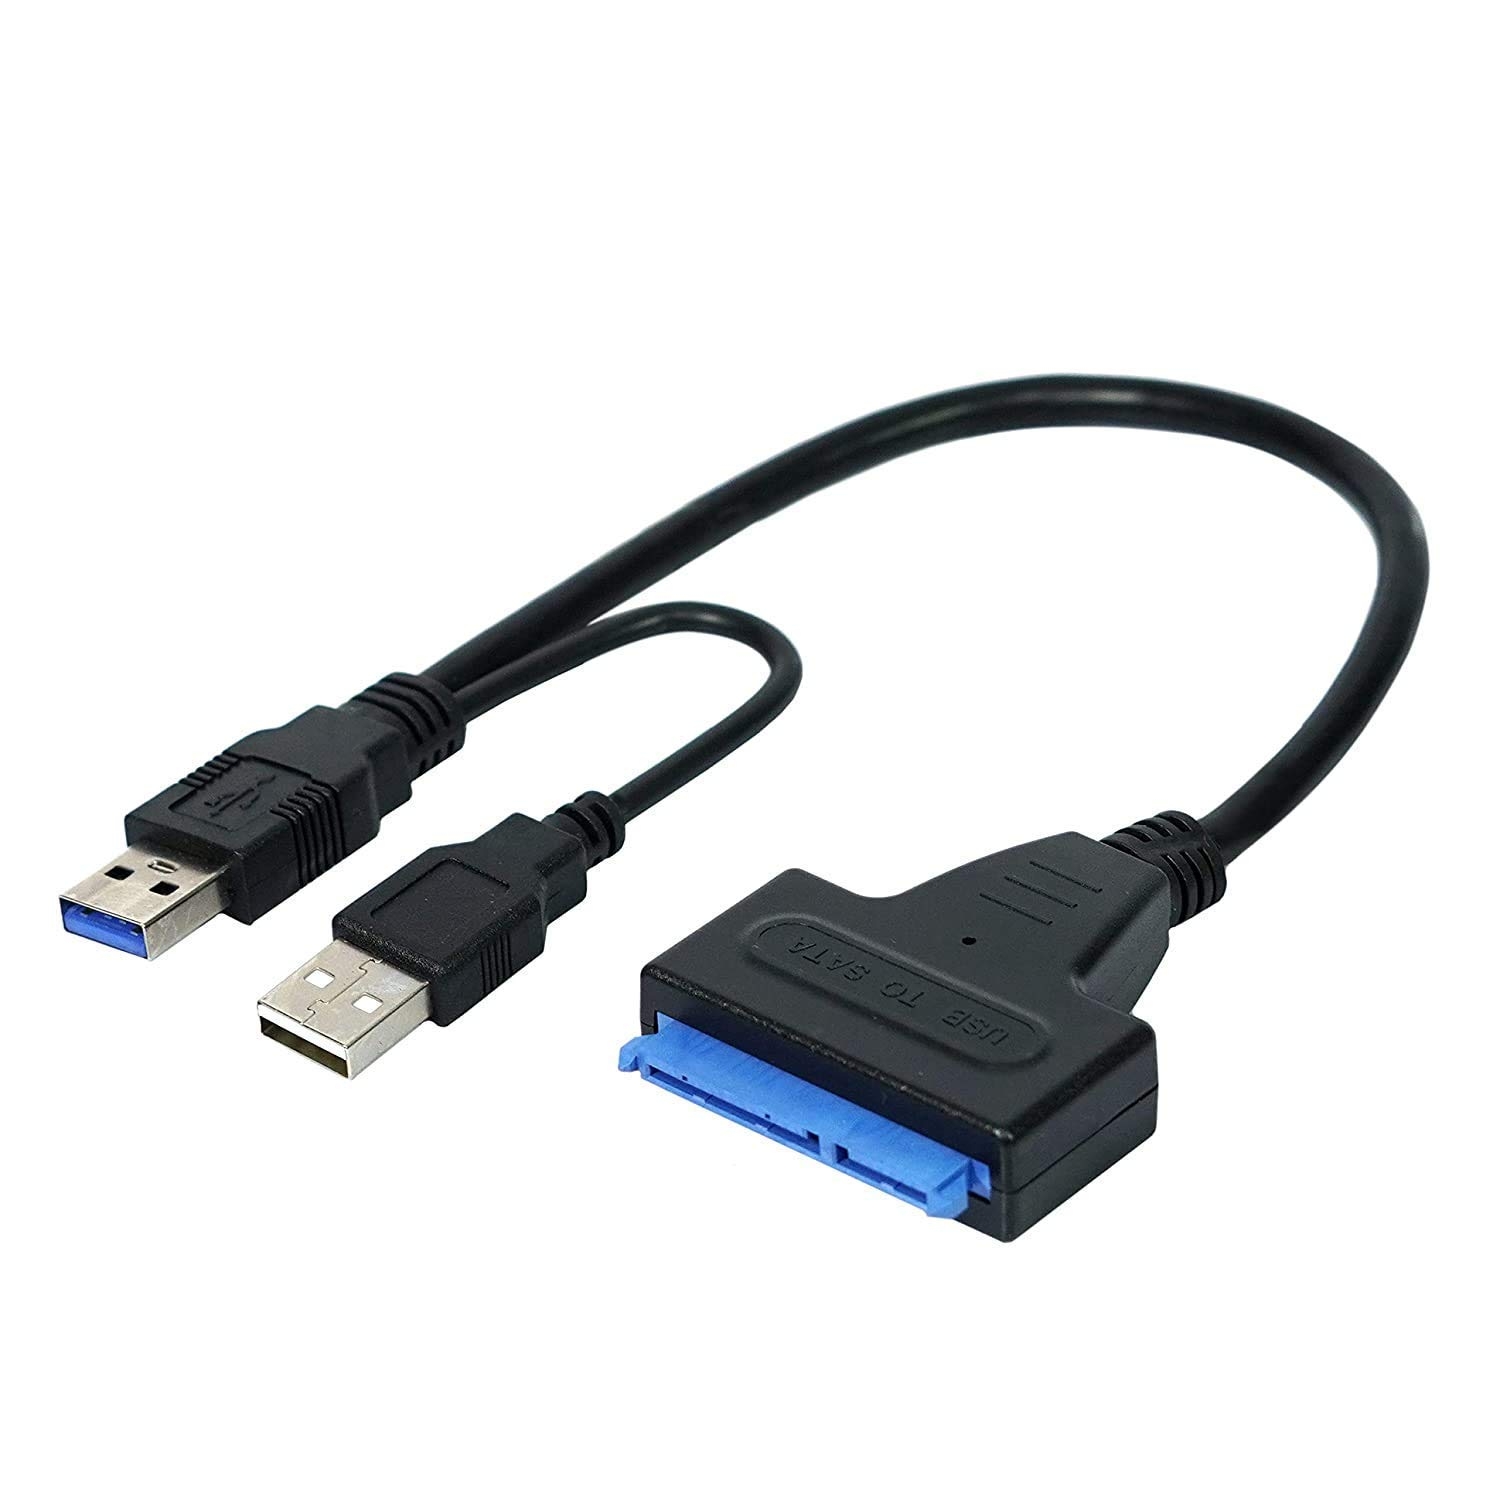 USB 3.0 to SATA III Adapter Cable with UASP SATA to USB Converter for 3.5/2.5 Hard Disk & Solid State Drives USB Adapter